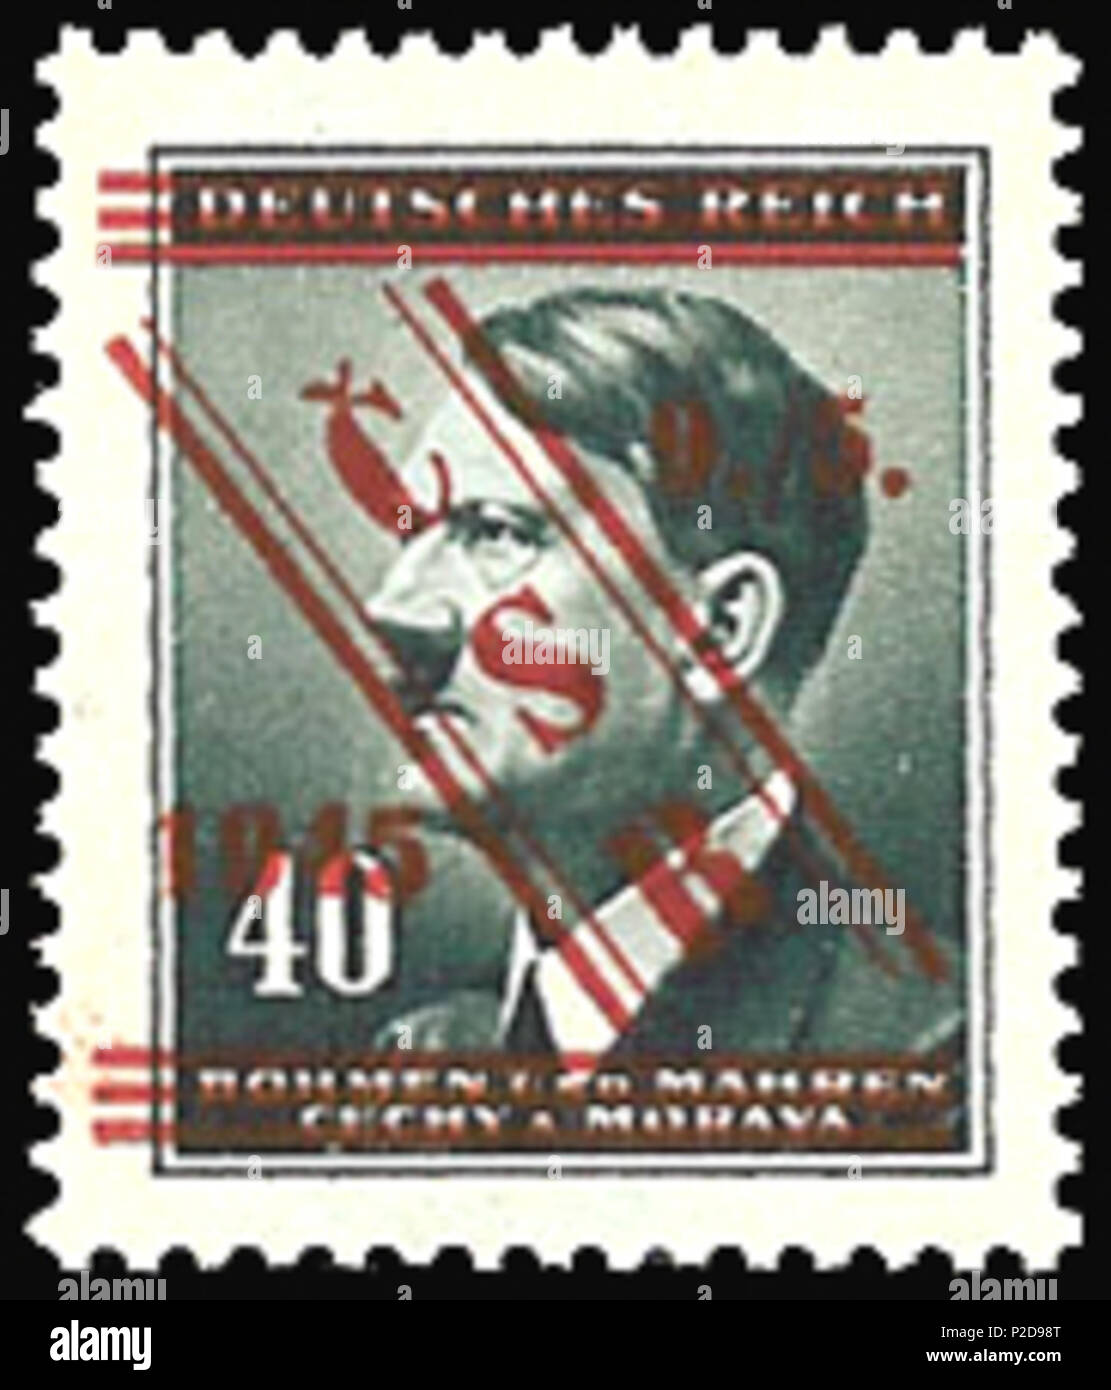 . English: Postage stamp of Third Reich Protectorate of Bohemia and Moravia, Adolf Hitler, overprinted in Prostejov, 1945 ???????: ???????? ????? ???????????? ???????? ????? ??????? ? ???????, ????????????? ? ????????? ? 1945 ????. 1945; uploaded 2009-08-14. uploaded by Nickpo 10 BuM1945Prostejovovpt Stock Photo